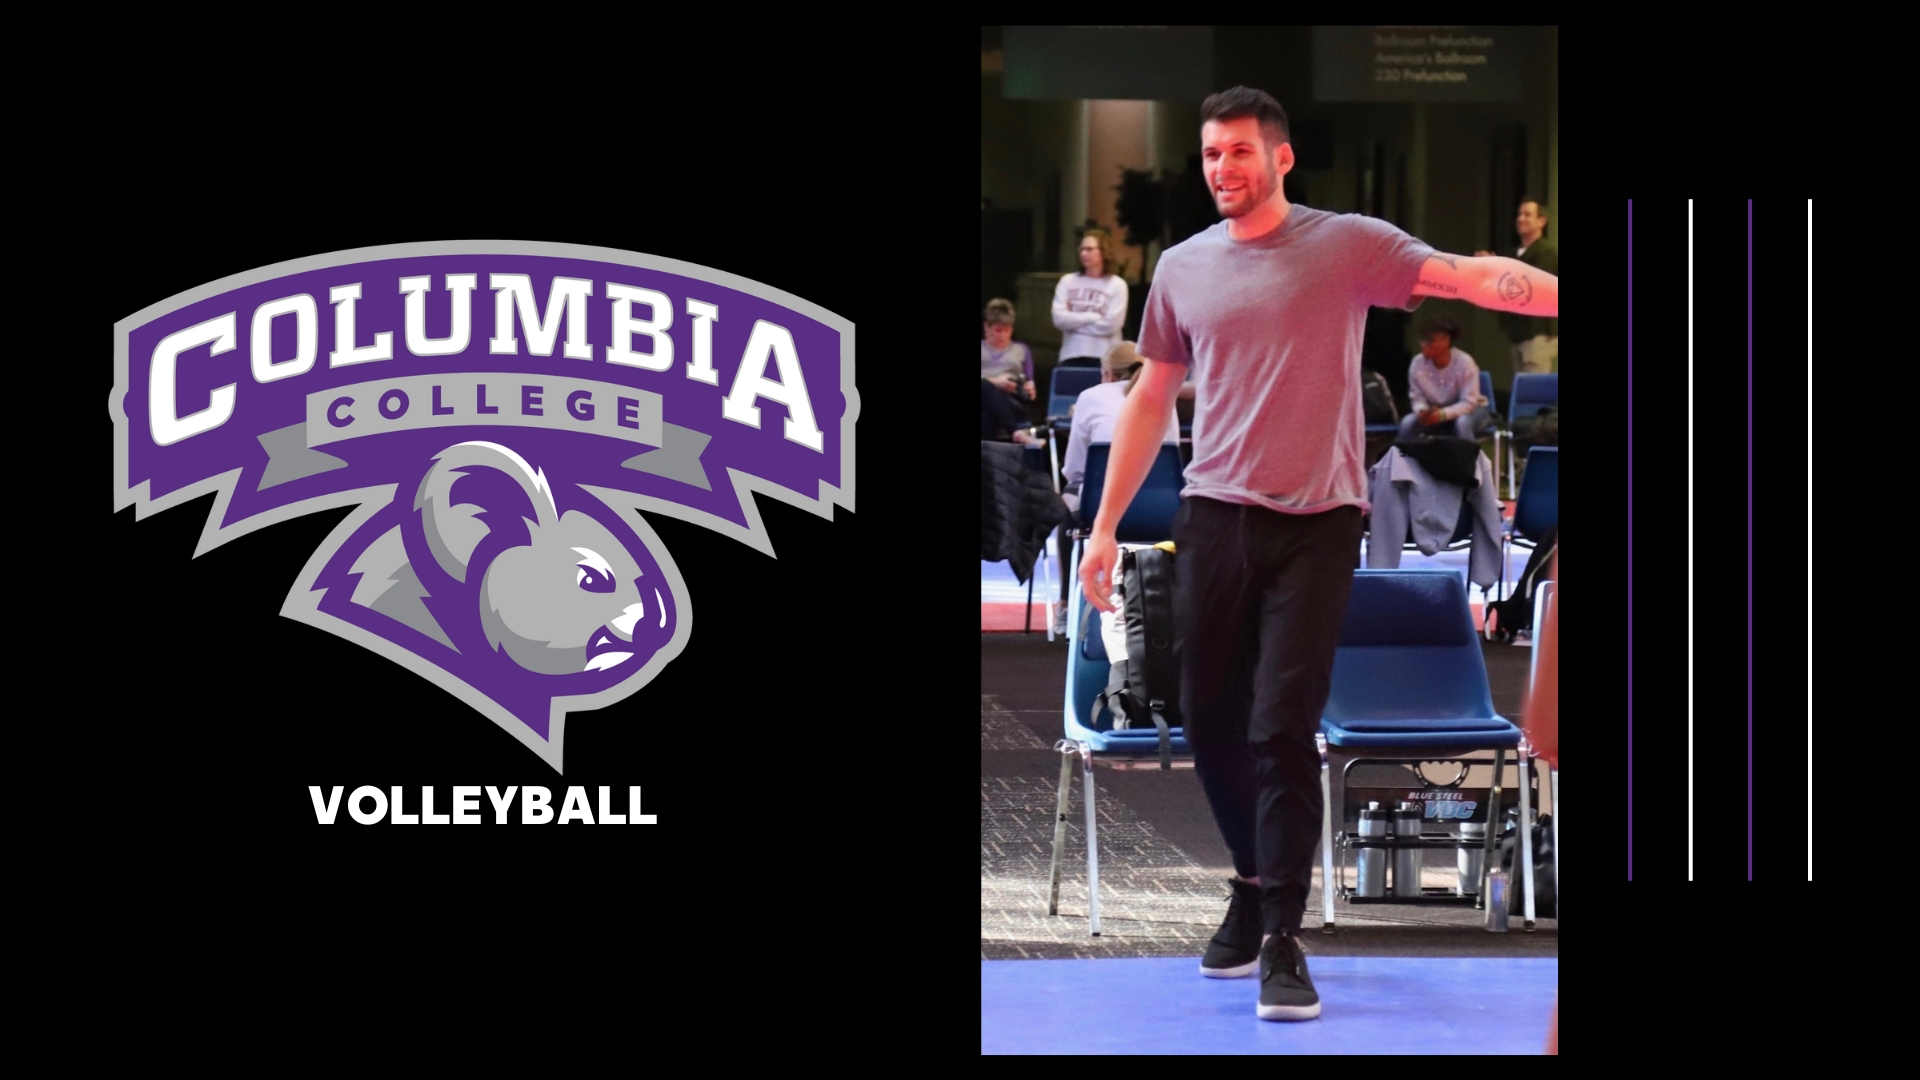 Columbia Names Burdette to Lead Women's Volleyball Program